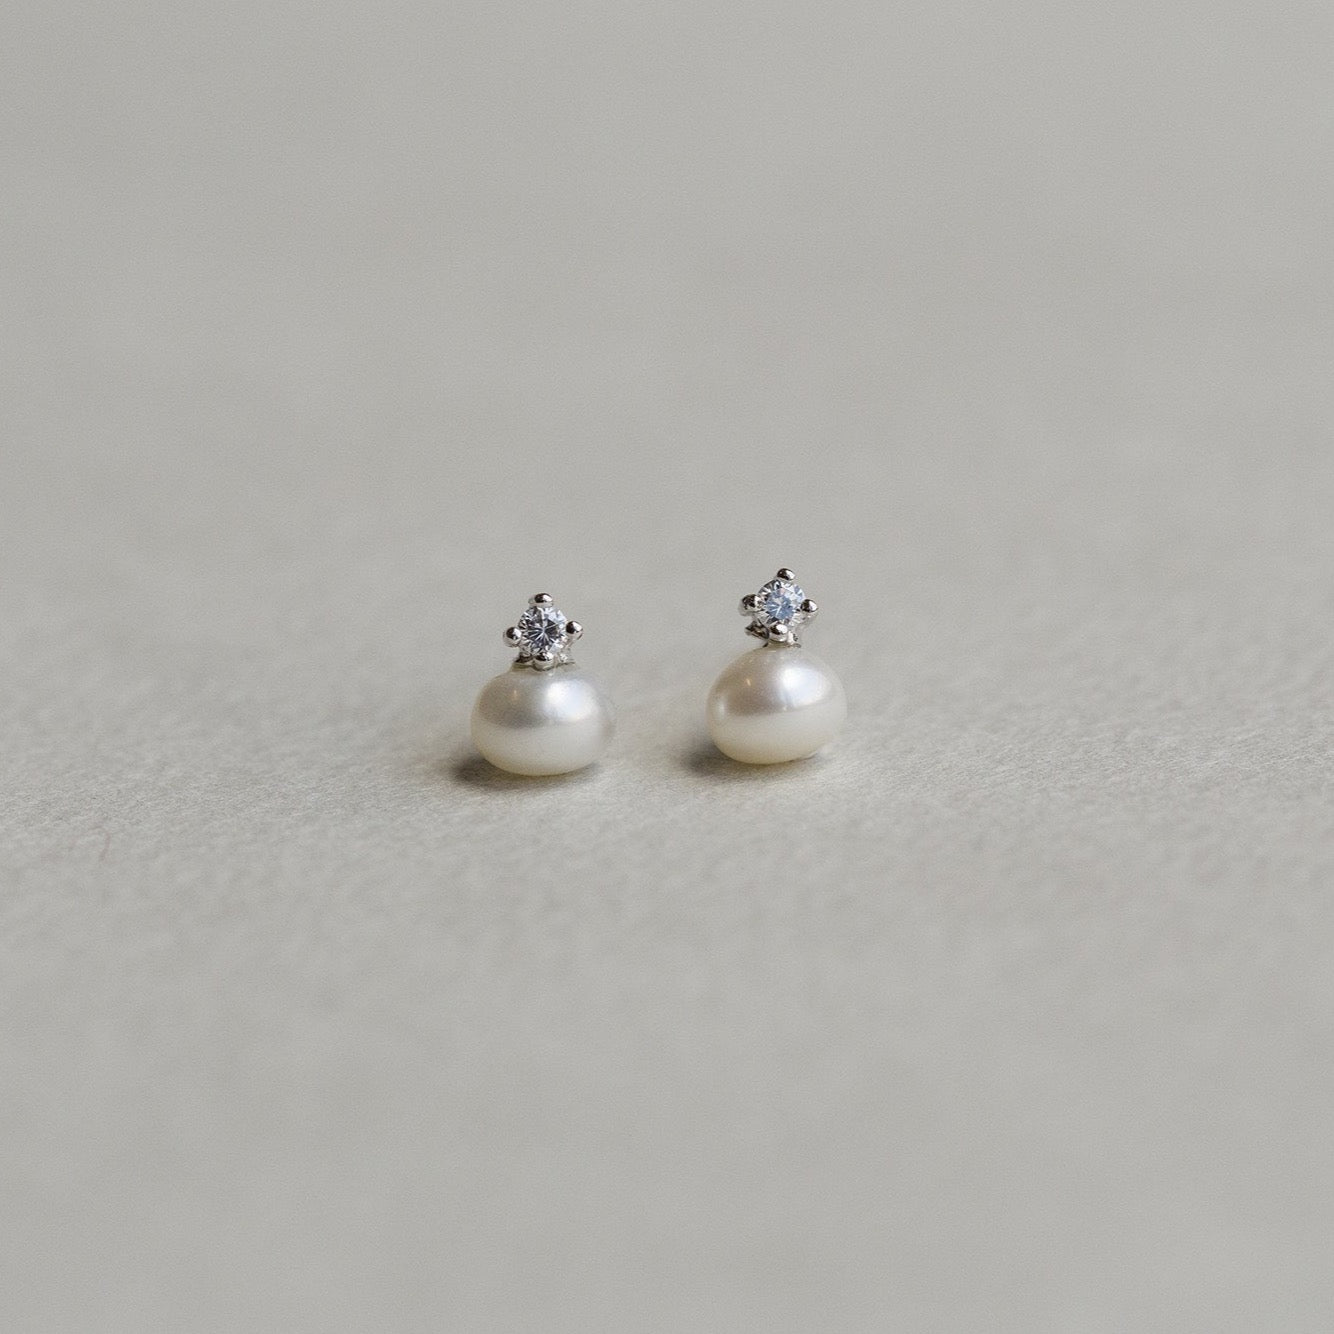 wonderful freshwater pearls with cubic zirconia 'crown'